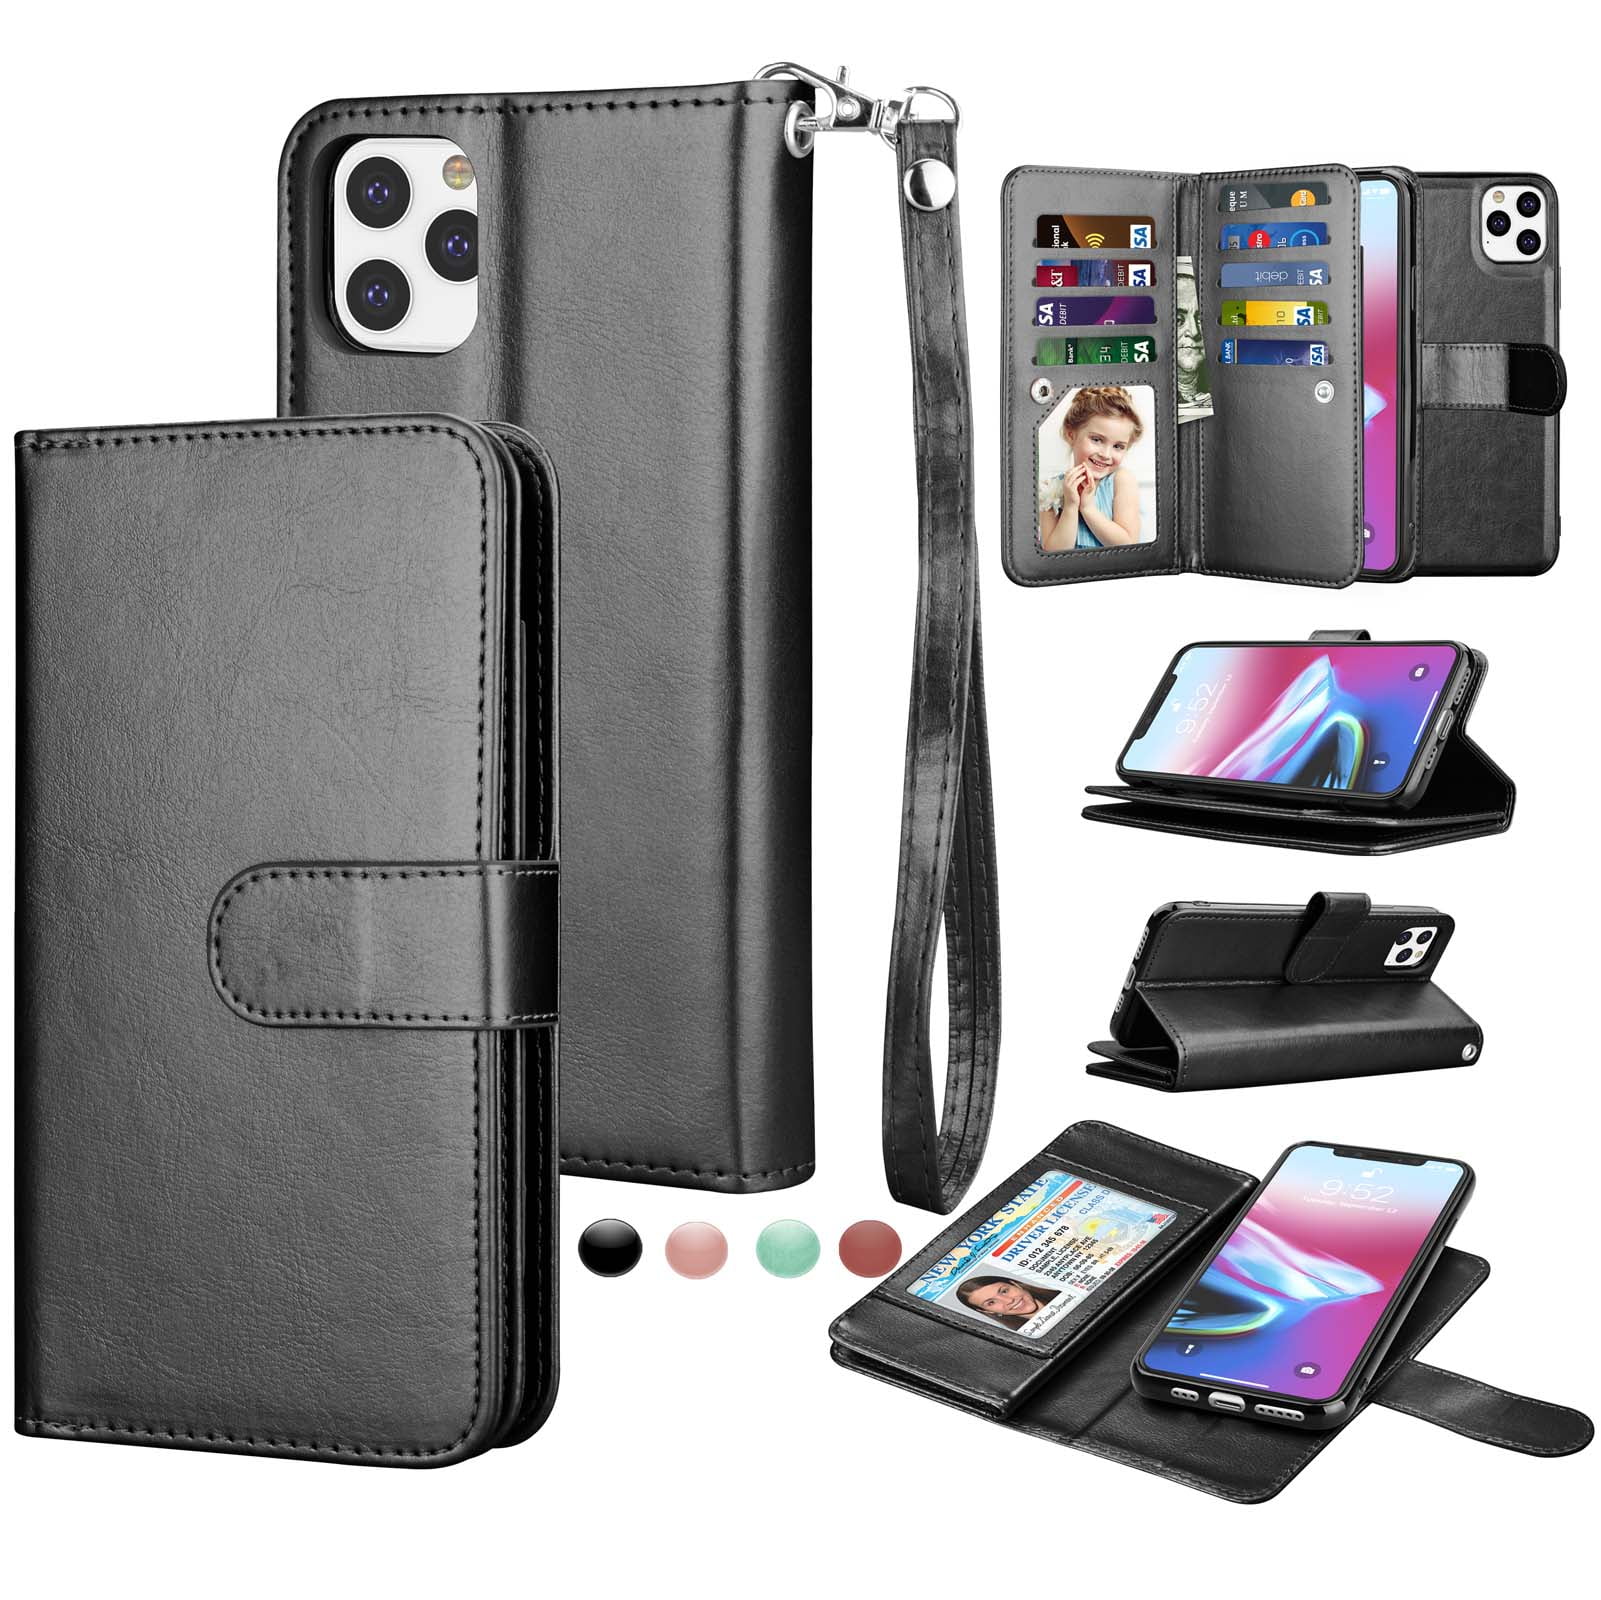 Magnetic Detachable Back Cover Supports Wireless Charging  GREEN iPhone 11 Max Pro Case iPhone 11 Pro Max Leather Personalized Wallet